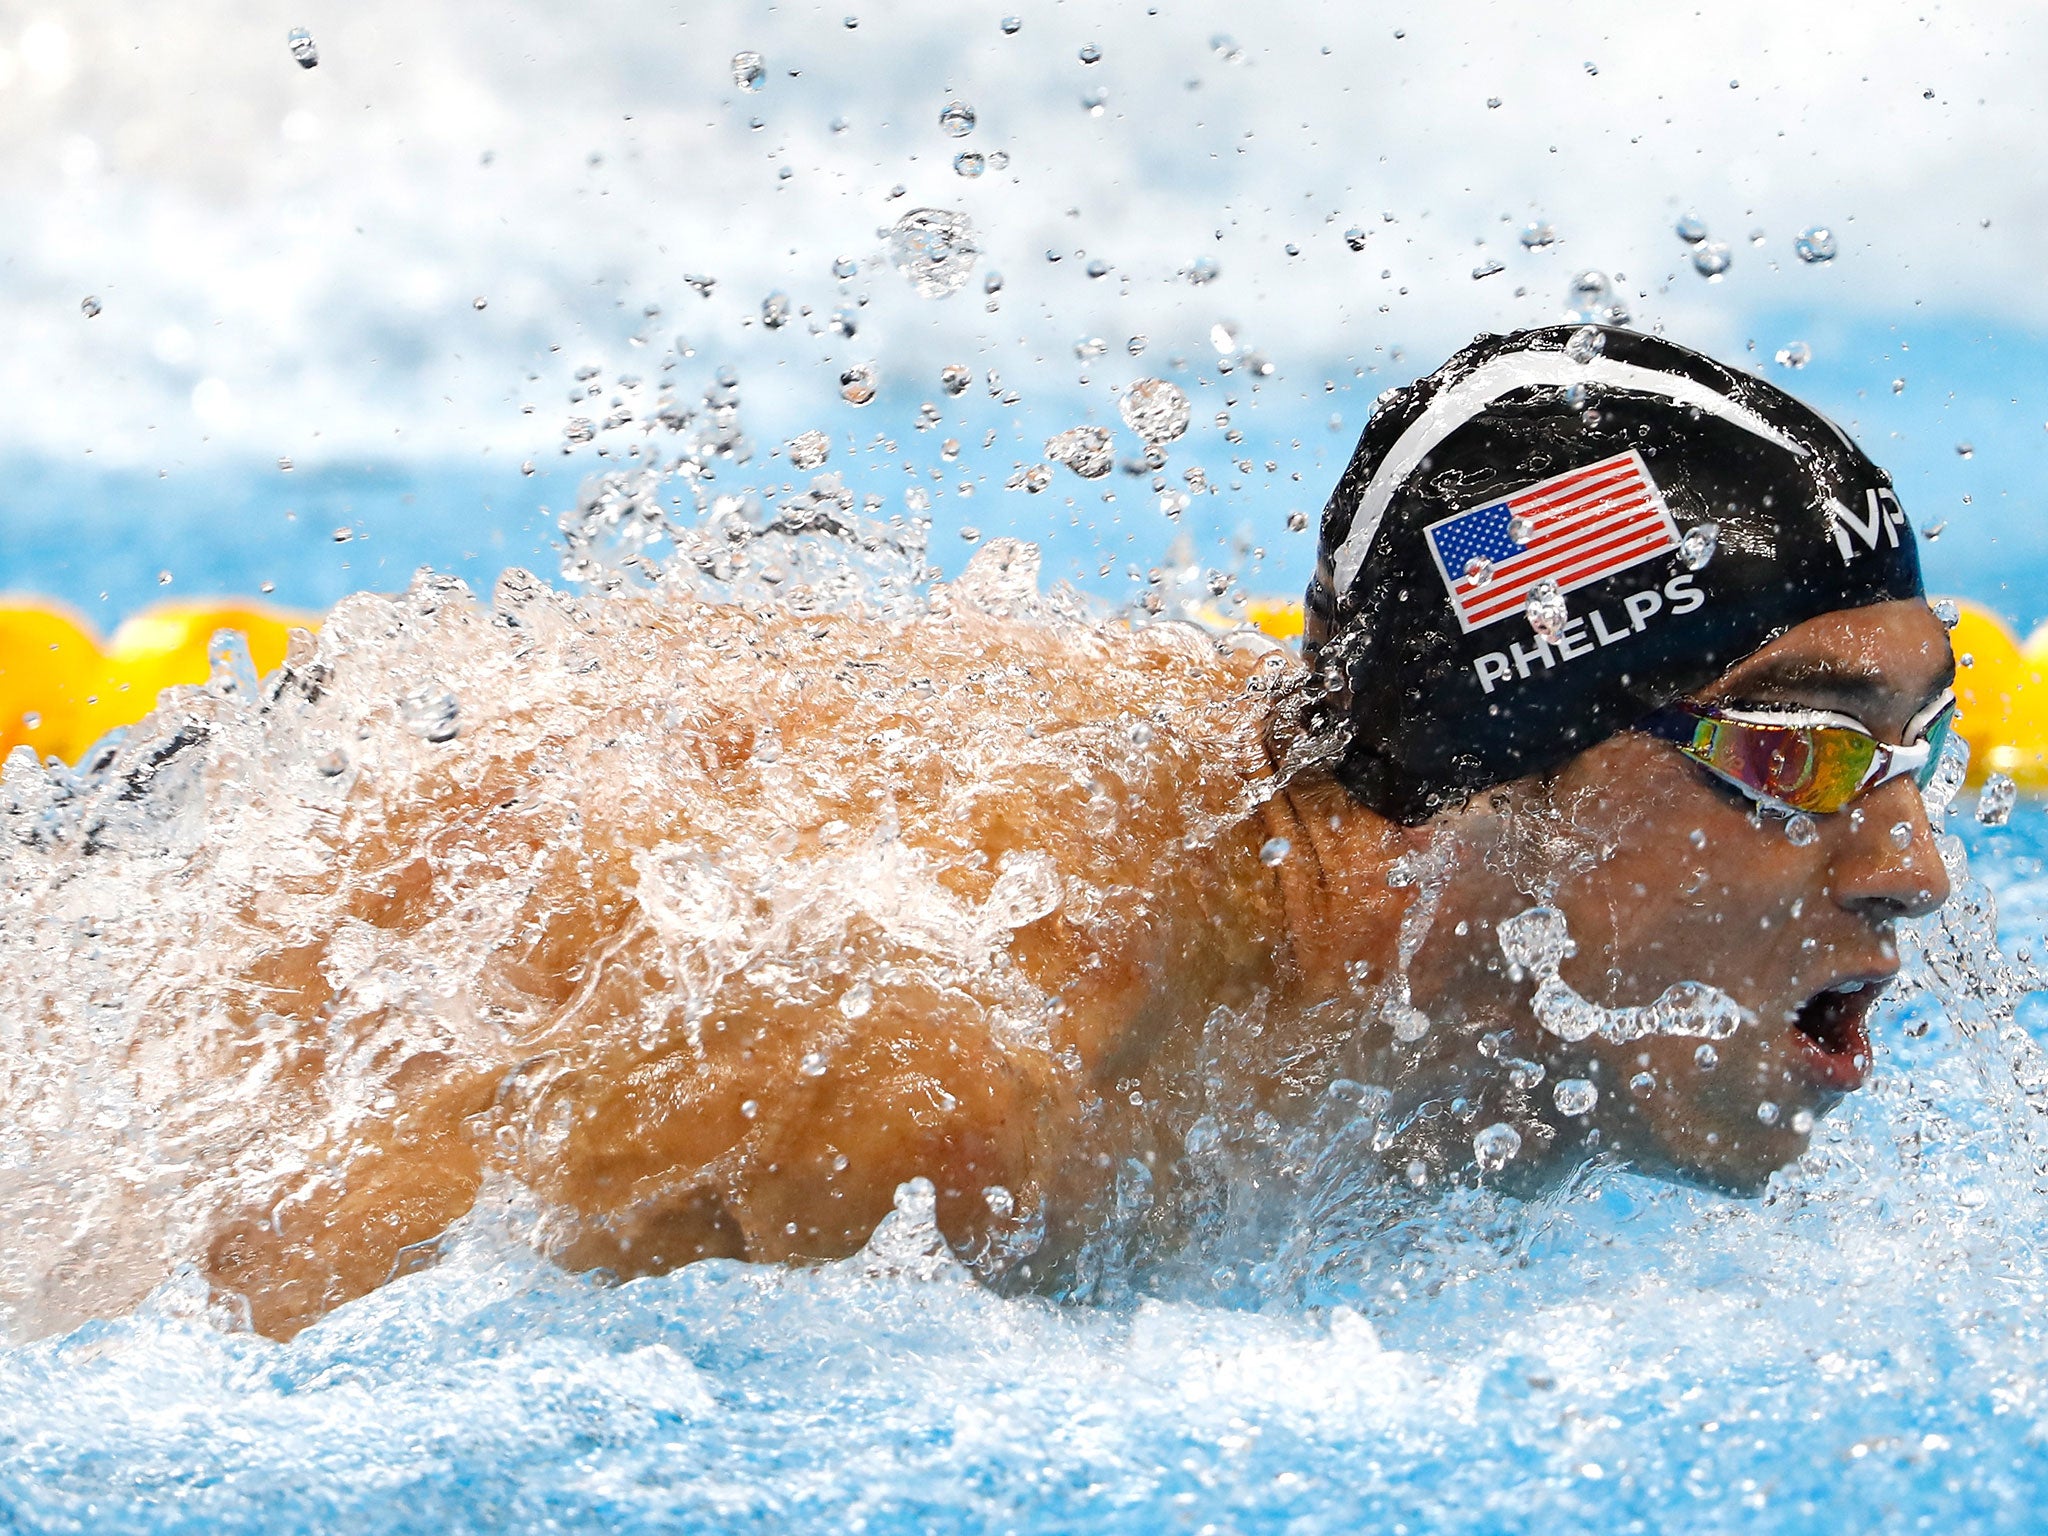 Michael Phelps in action at Rio 2016